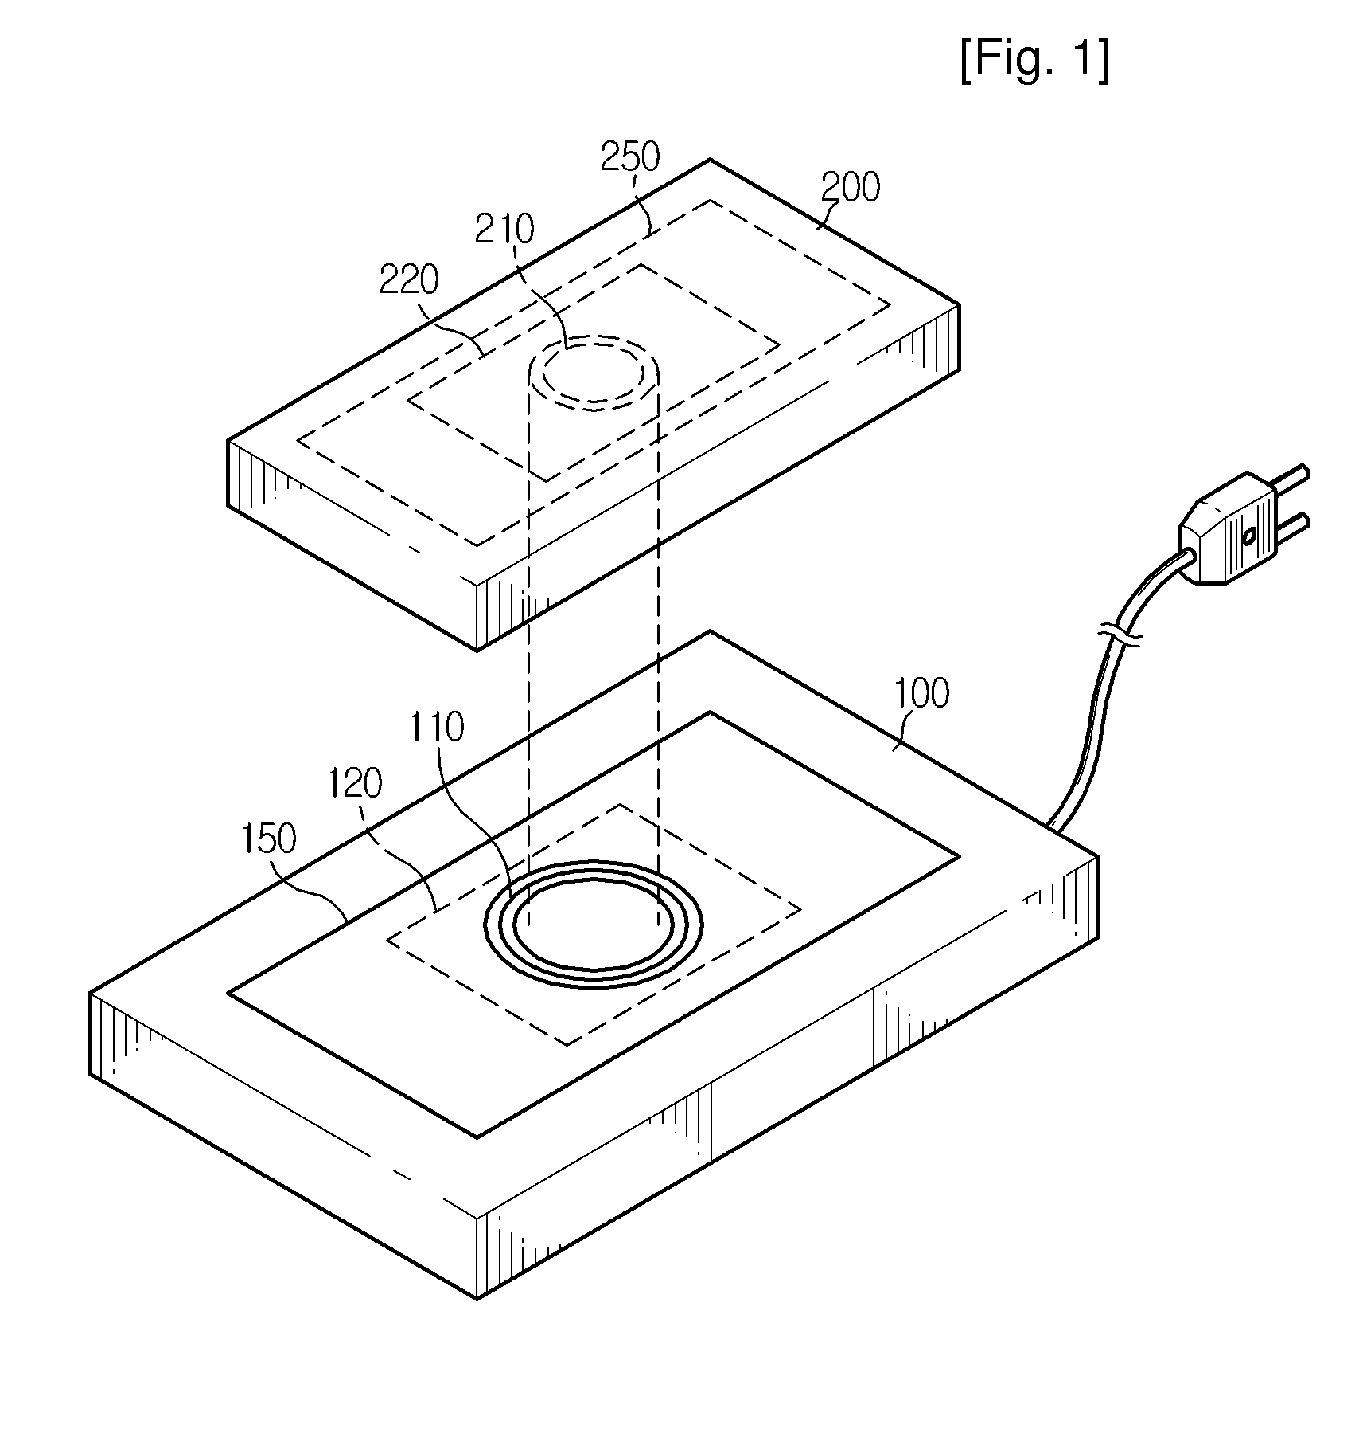 Contactless charging method for charging battery